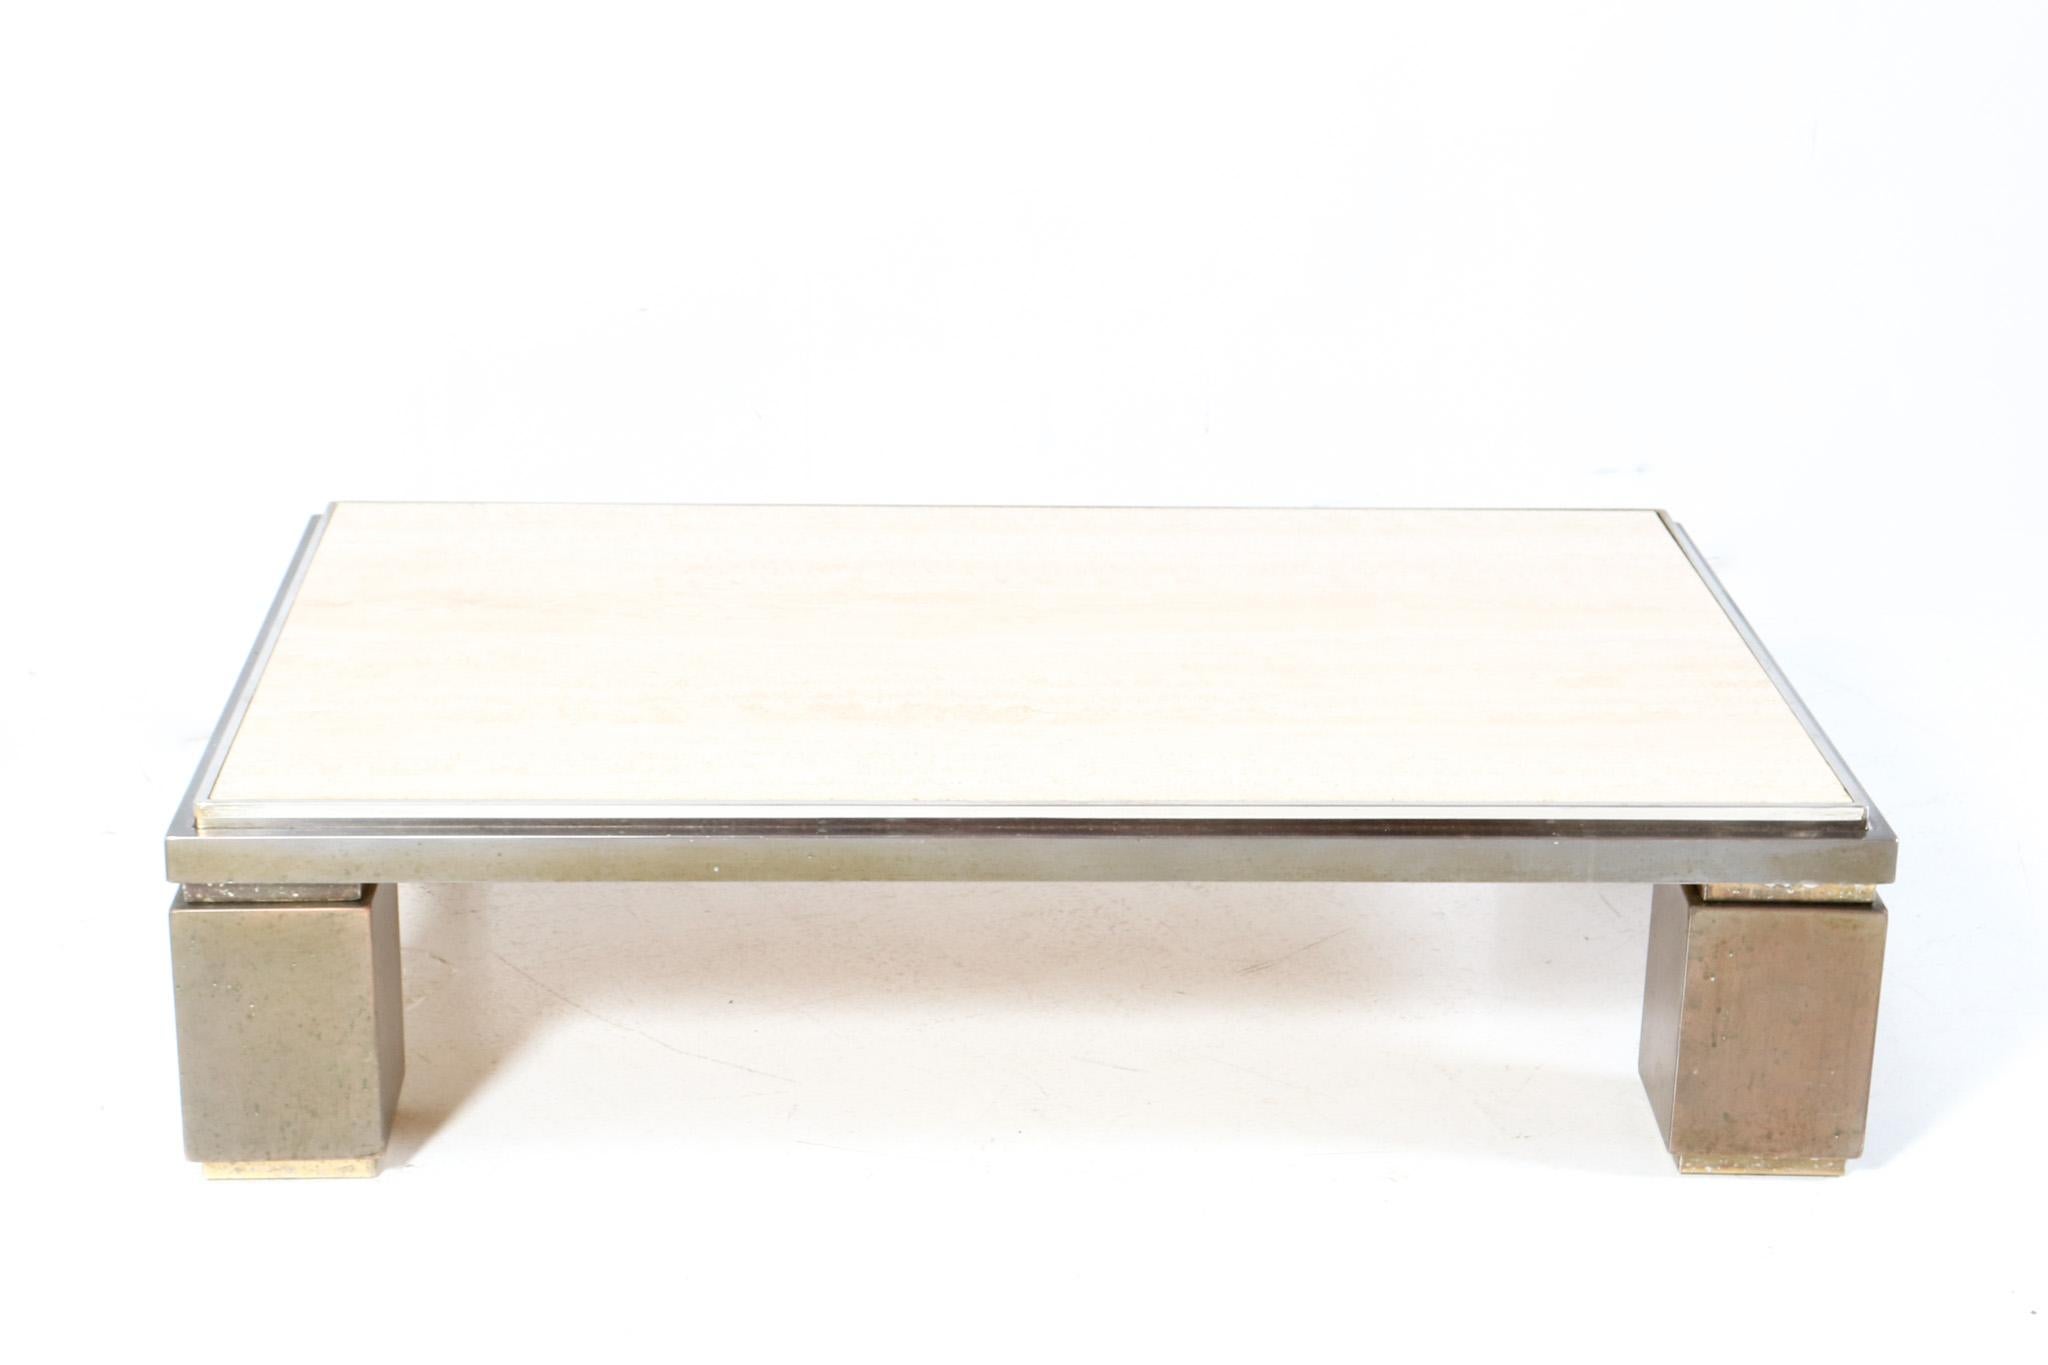 Belgian Hollywood Regency Large Coffee Table by Belgo Chrome with Travertine Top, 1970s For Sale